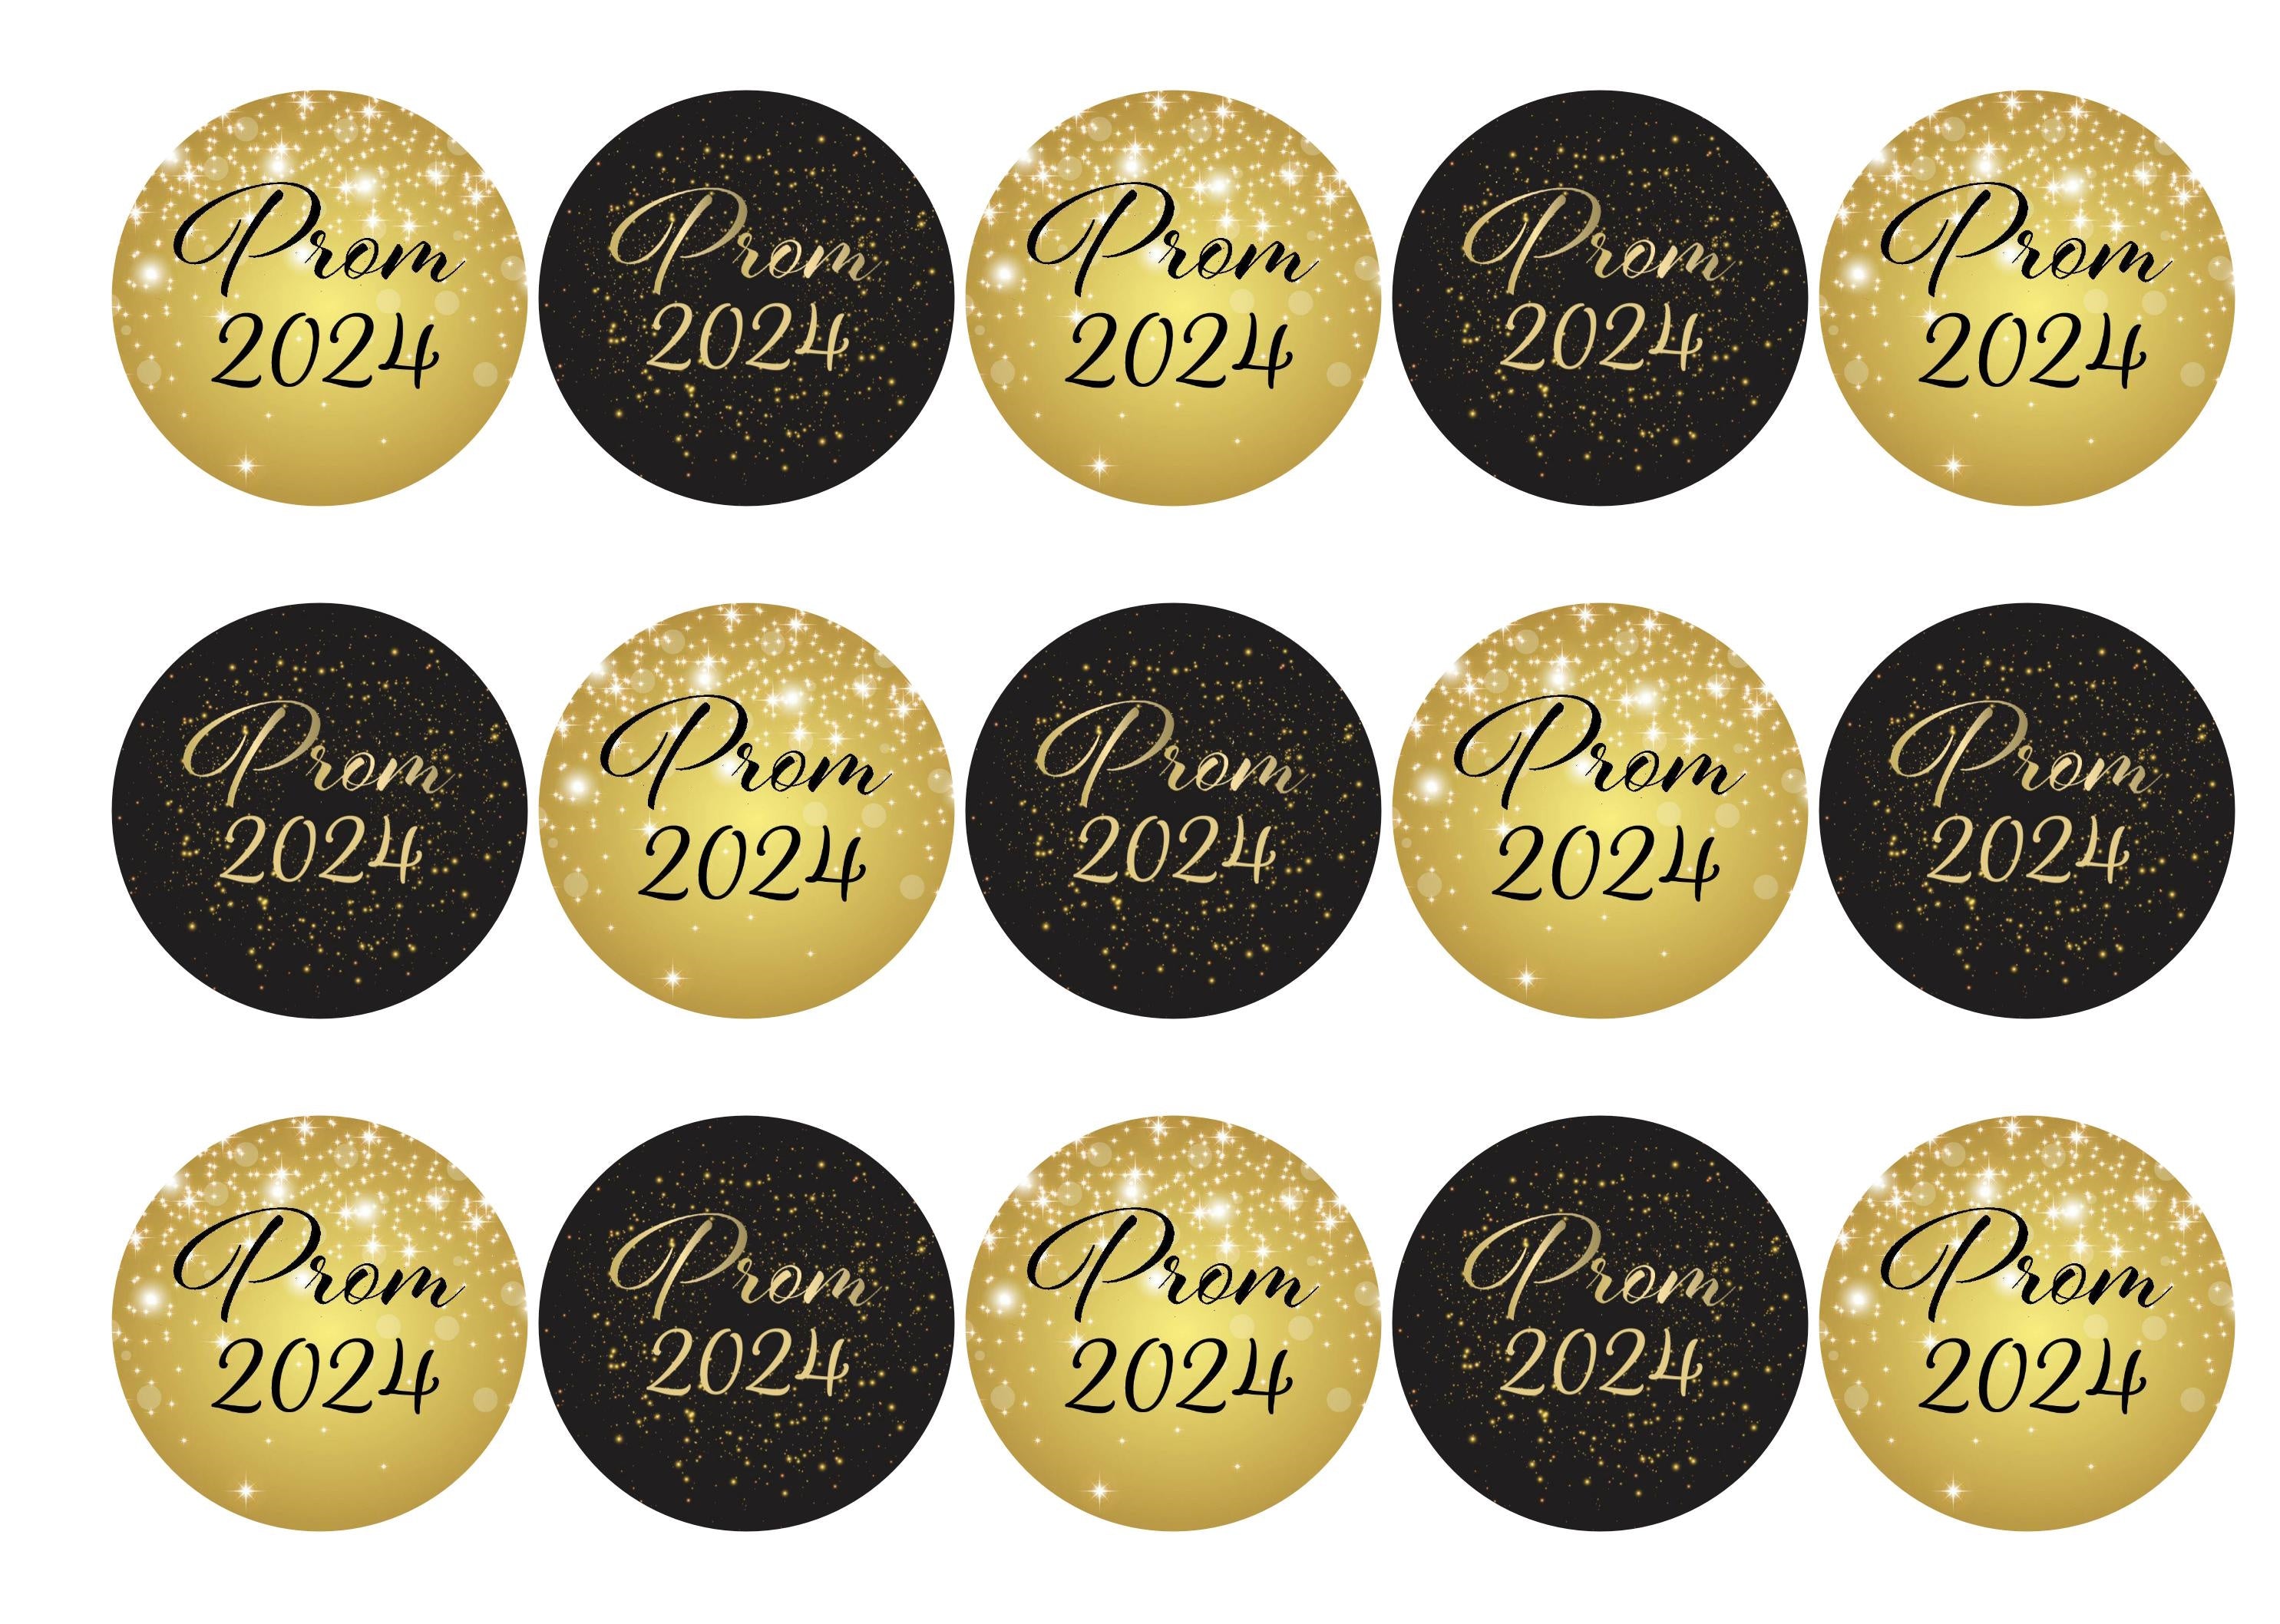 15 printed cupcake toppers with gold and black Prom 2024 theme